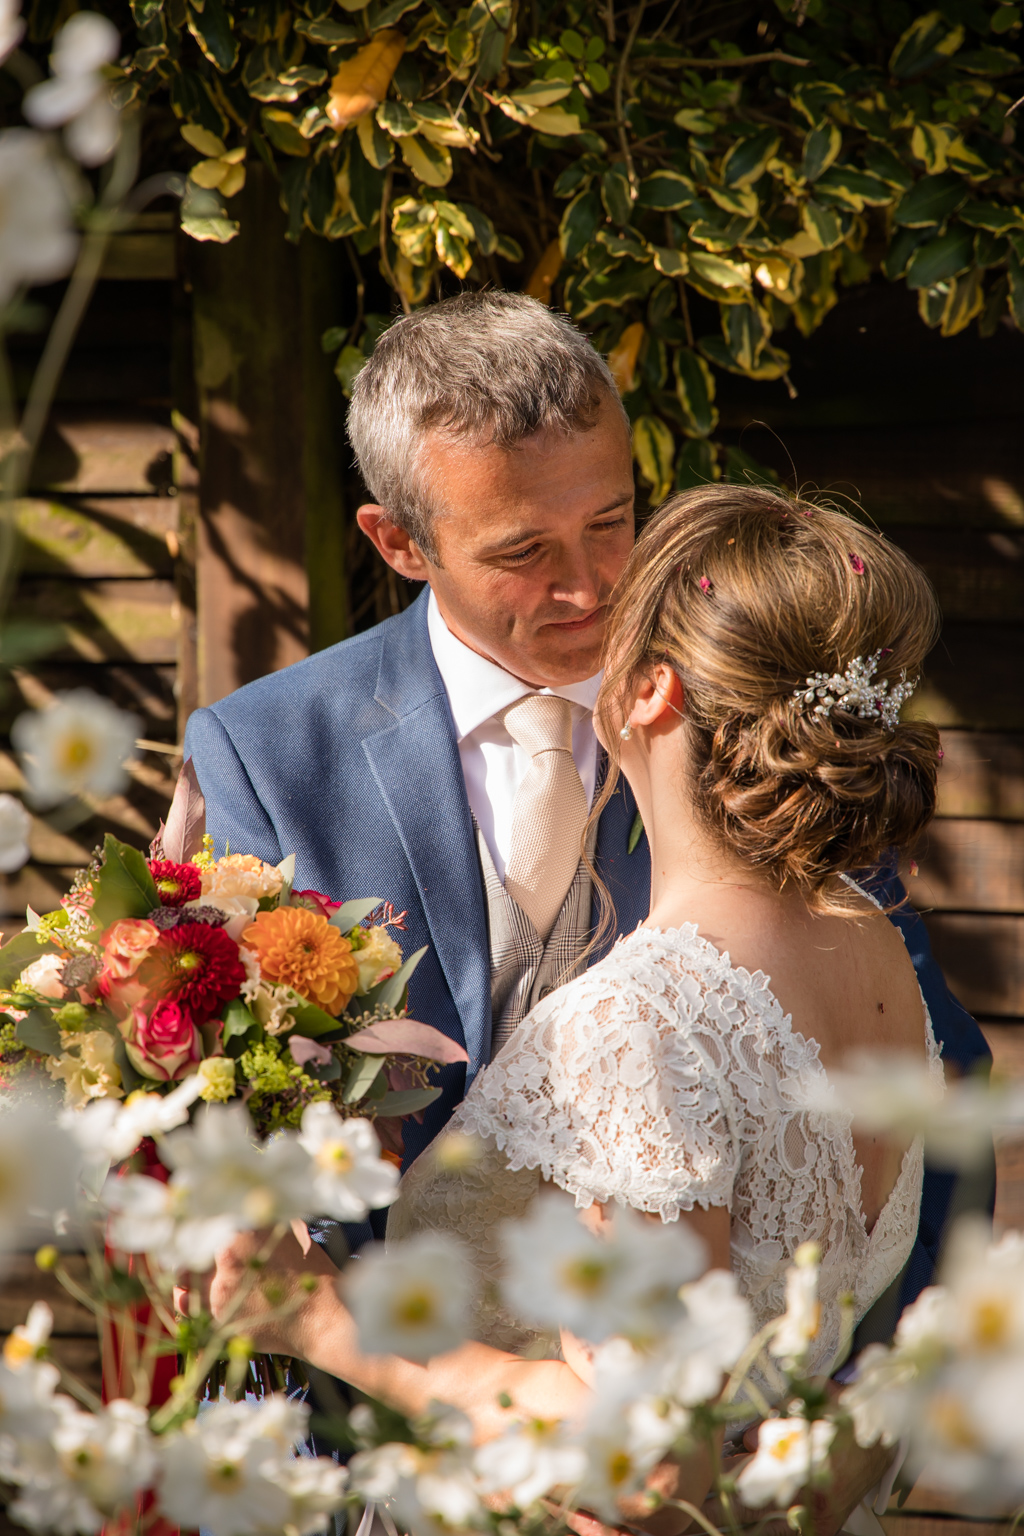 Real wedding at The Montagu Arms, captured by Captured by Crissi